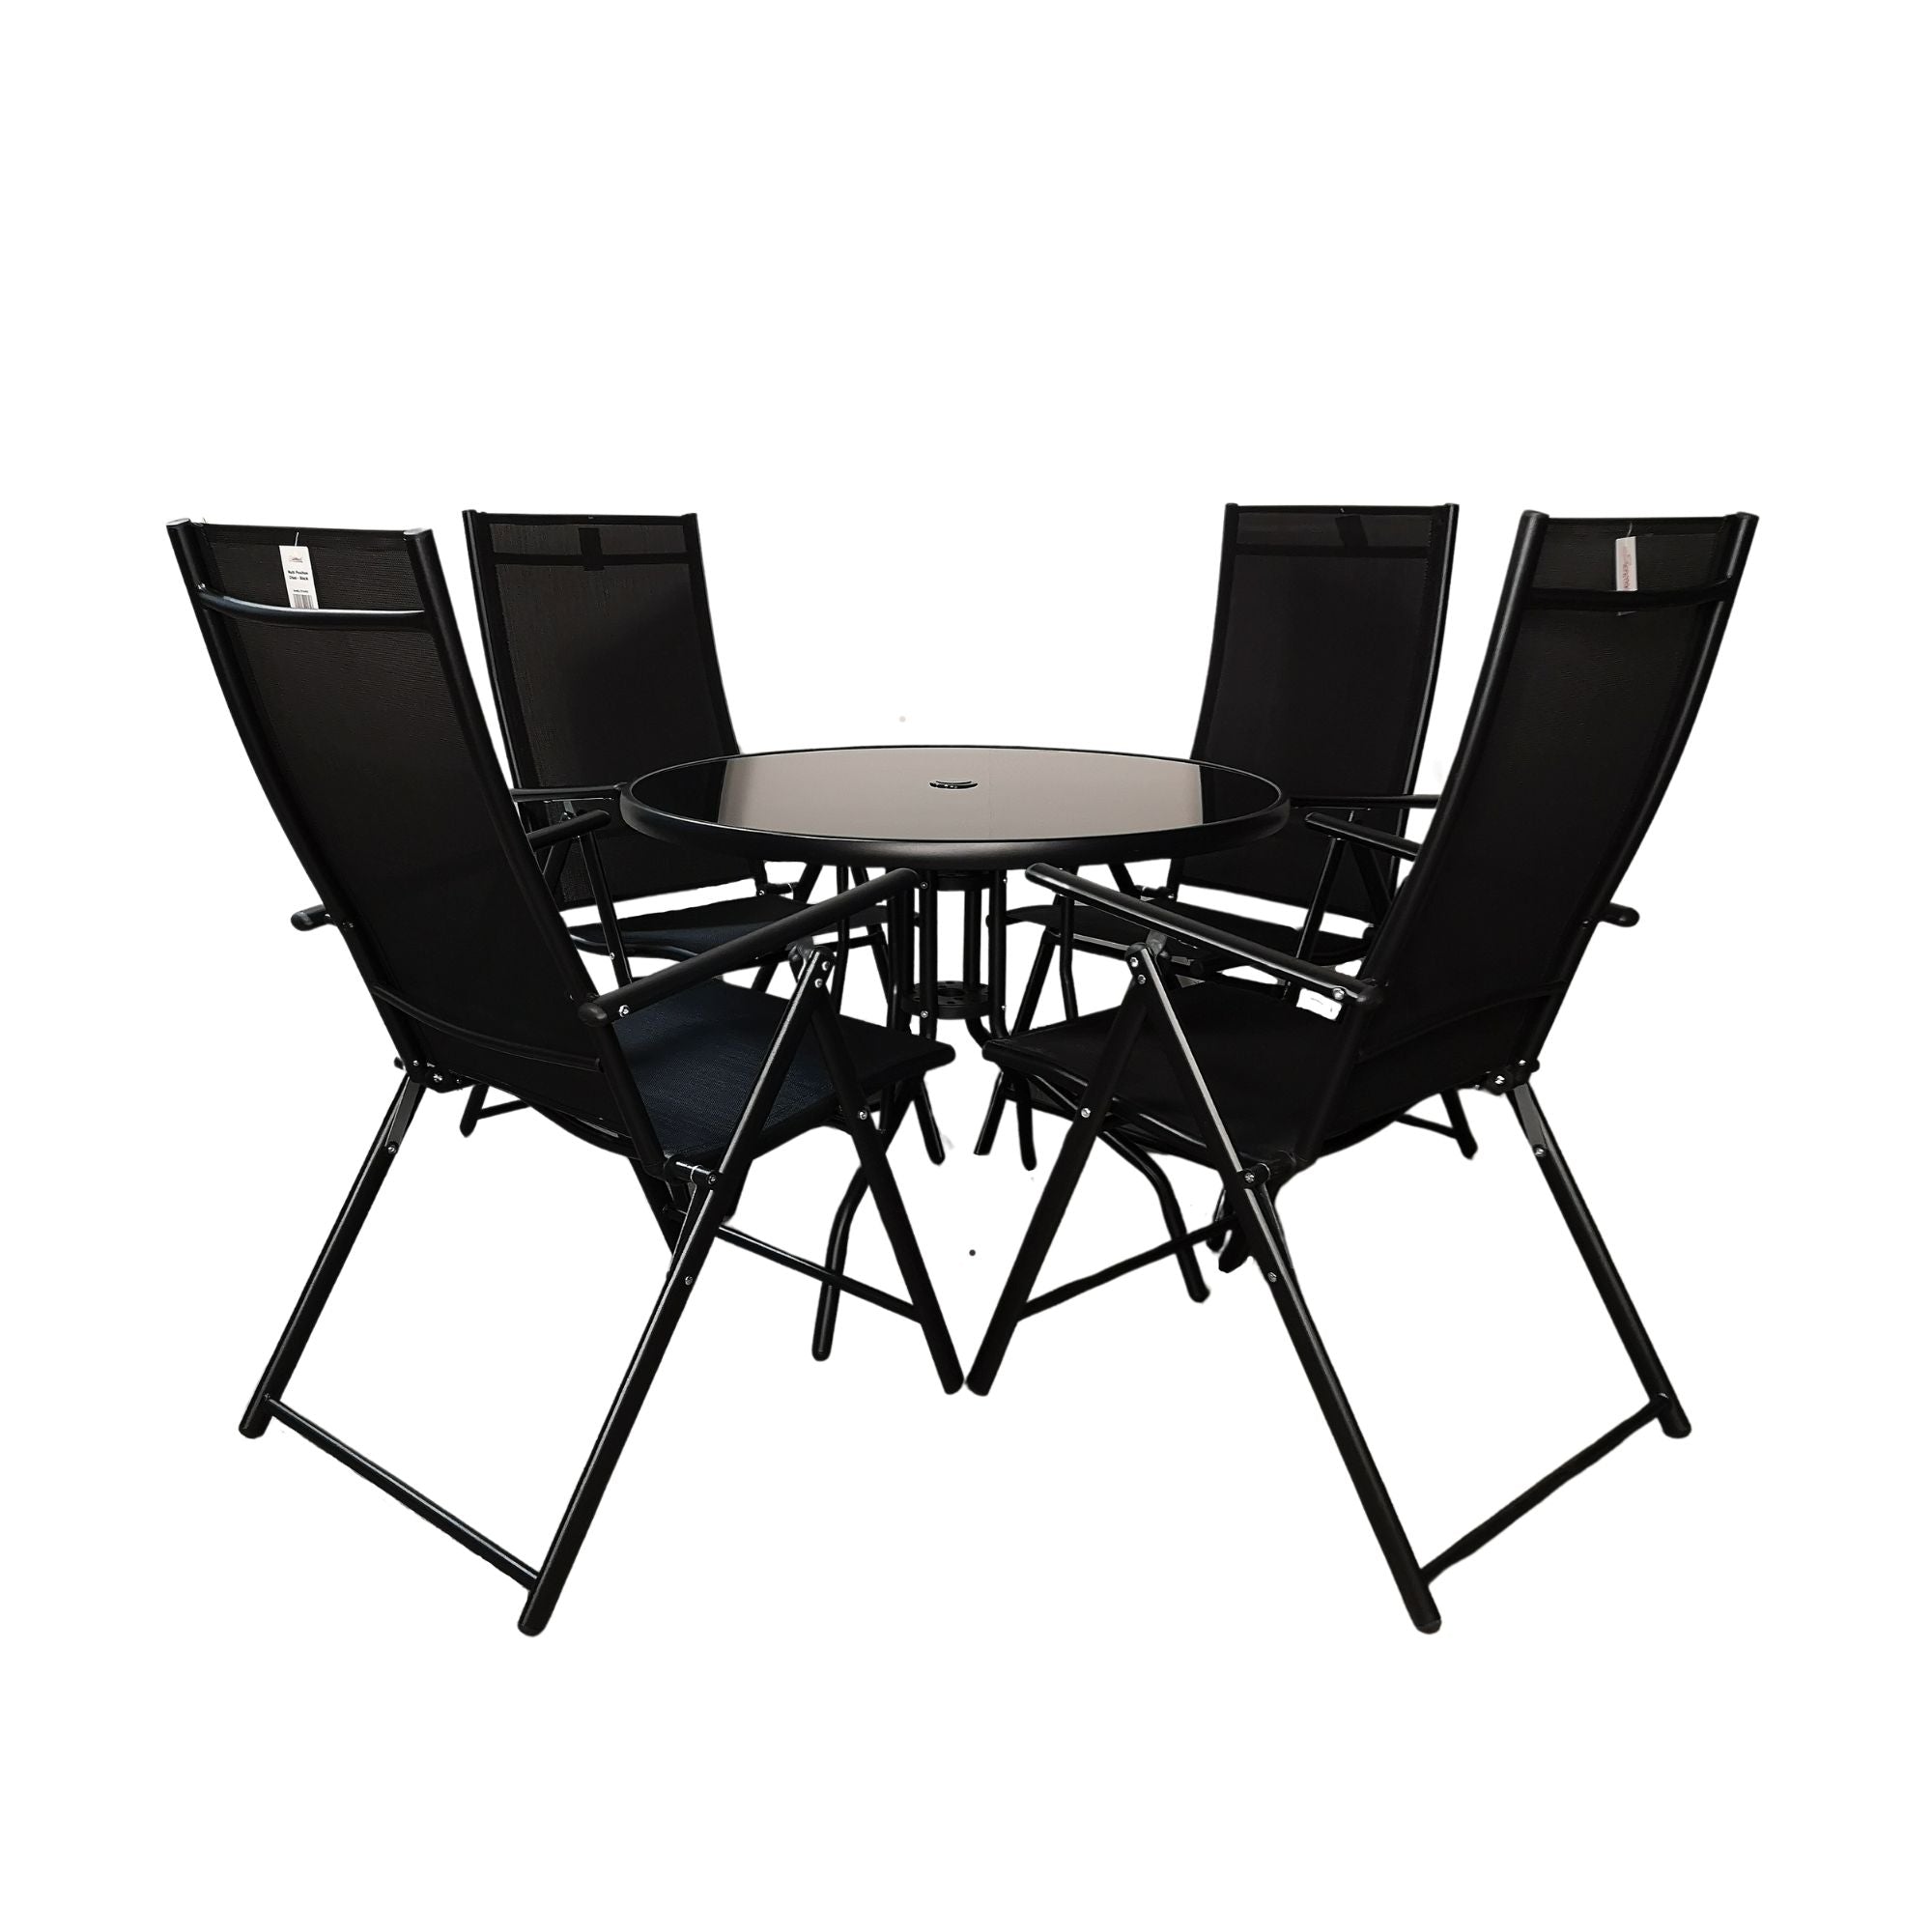 Outdoor 4 Person Round Glass Top Garden Patio Dining Table Chairs Set